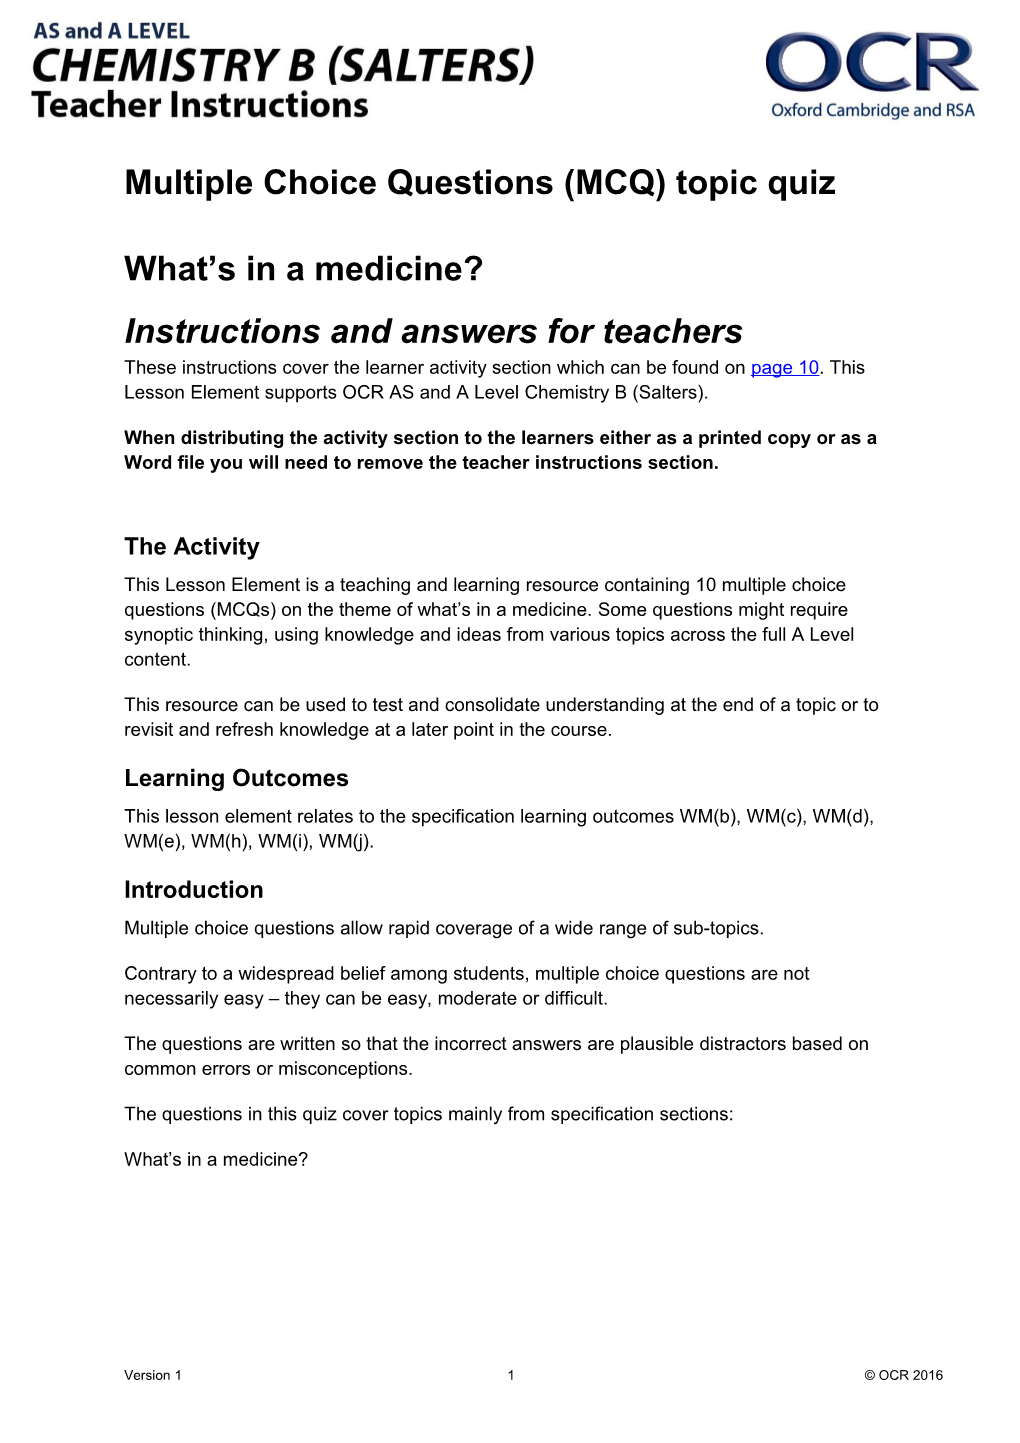 OCR AS and a Level Chemistry B (Salters) Multiple Choice Questions Quiz (What's in a Medicine?)